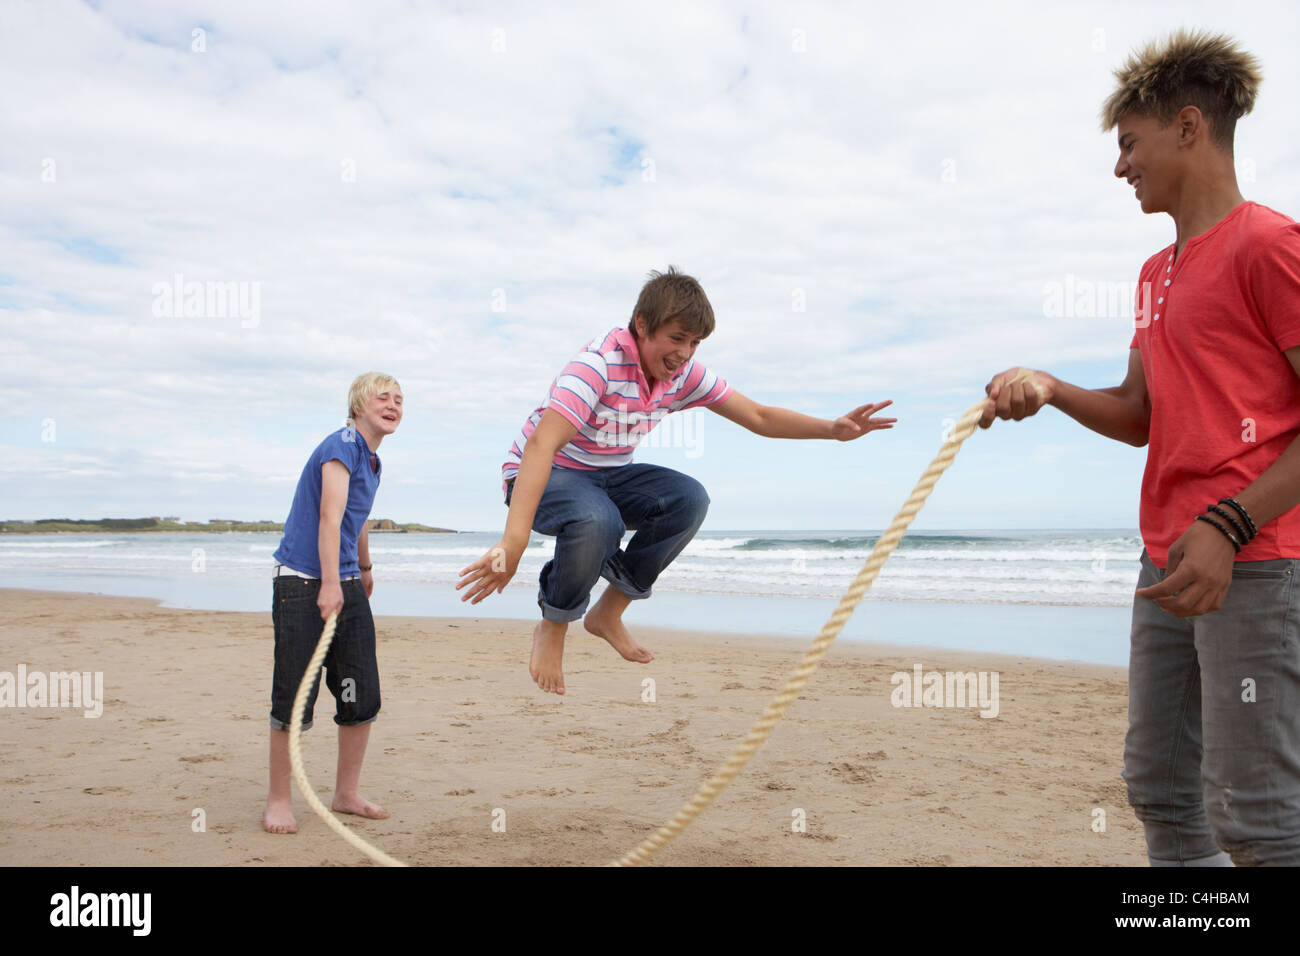 Teenagers playing skipping rope Stock Photo